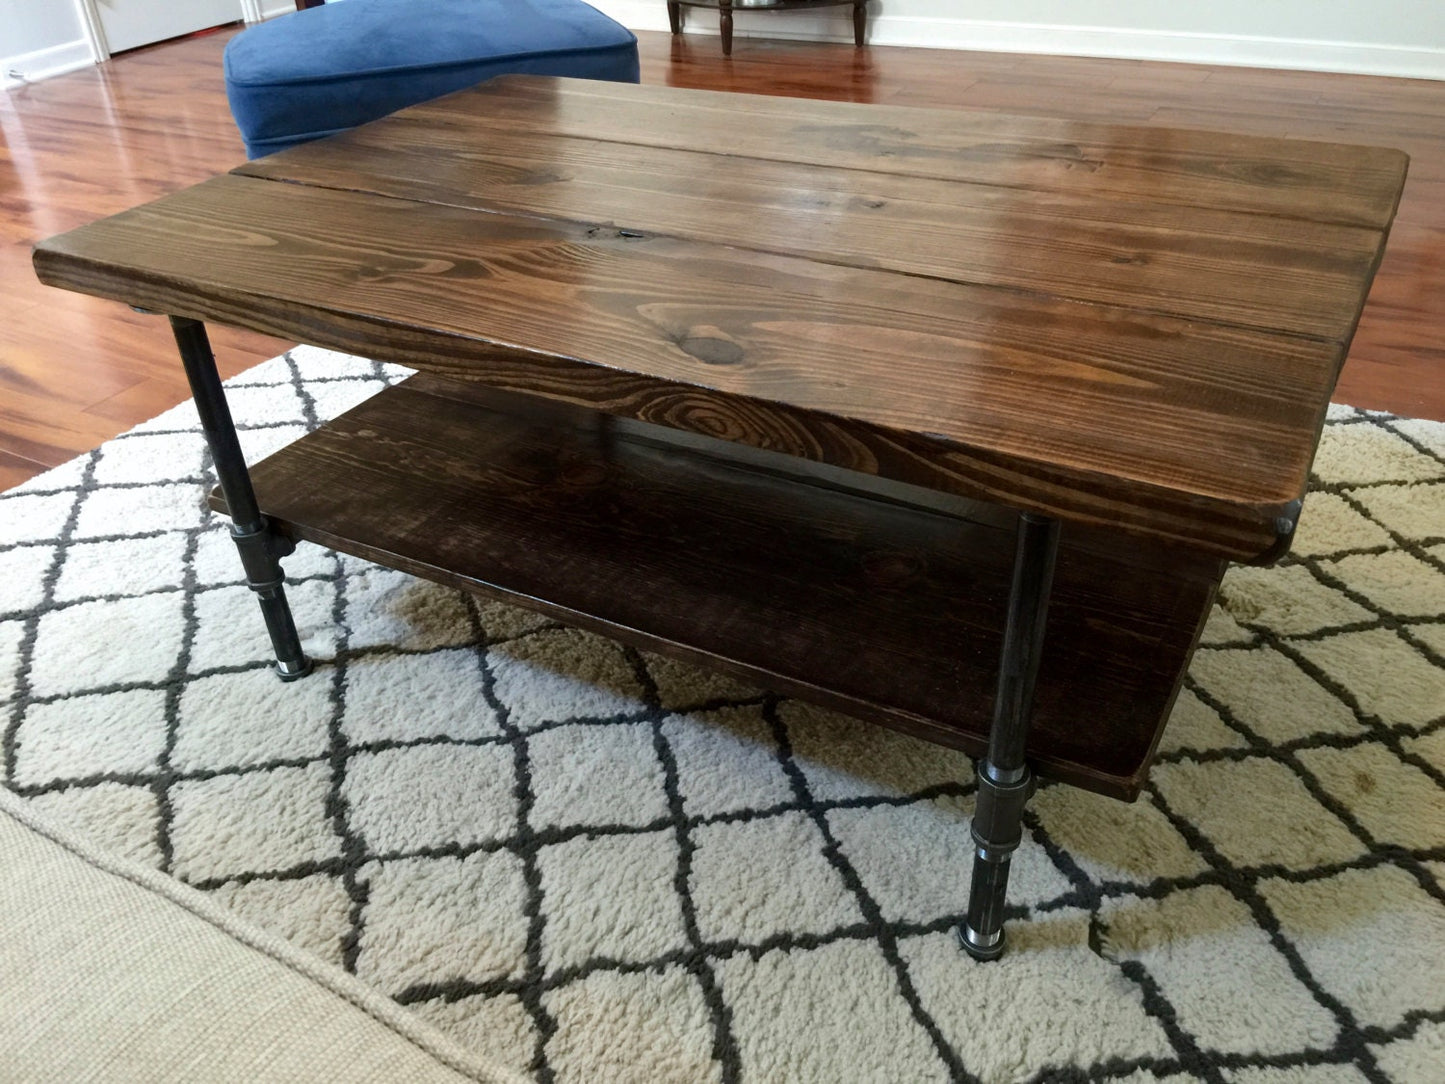 Steel and Pine Wood Coffee Table with Shelf Style 2